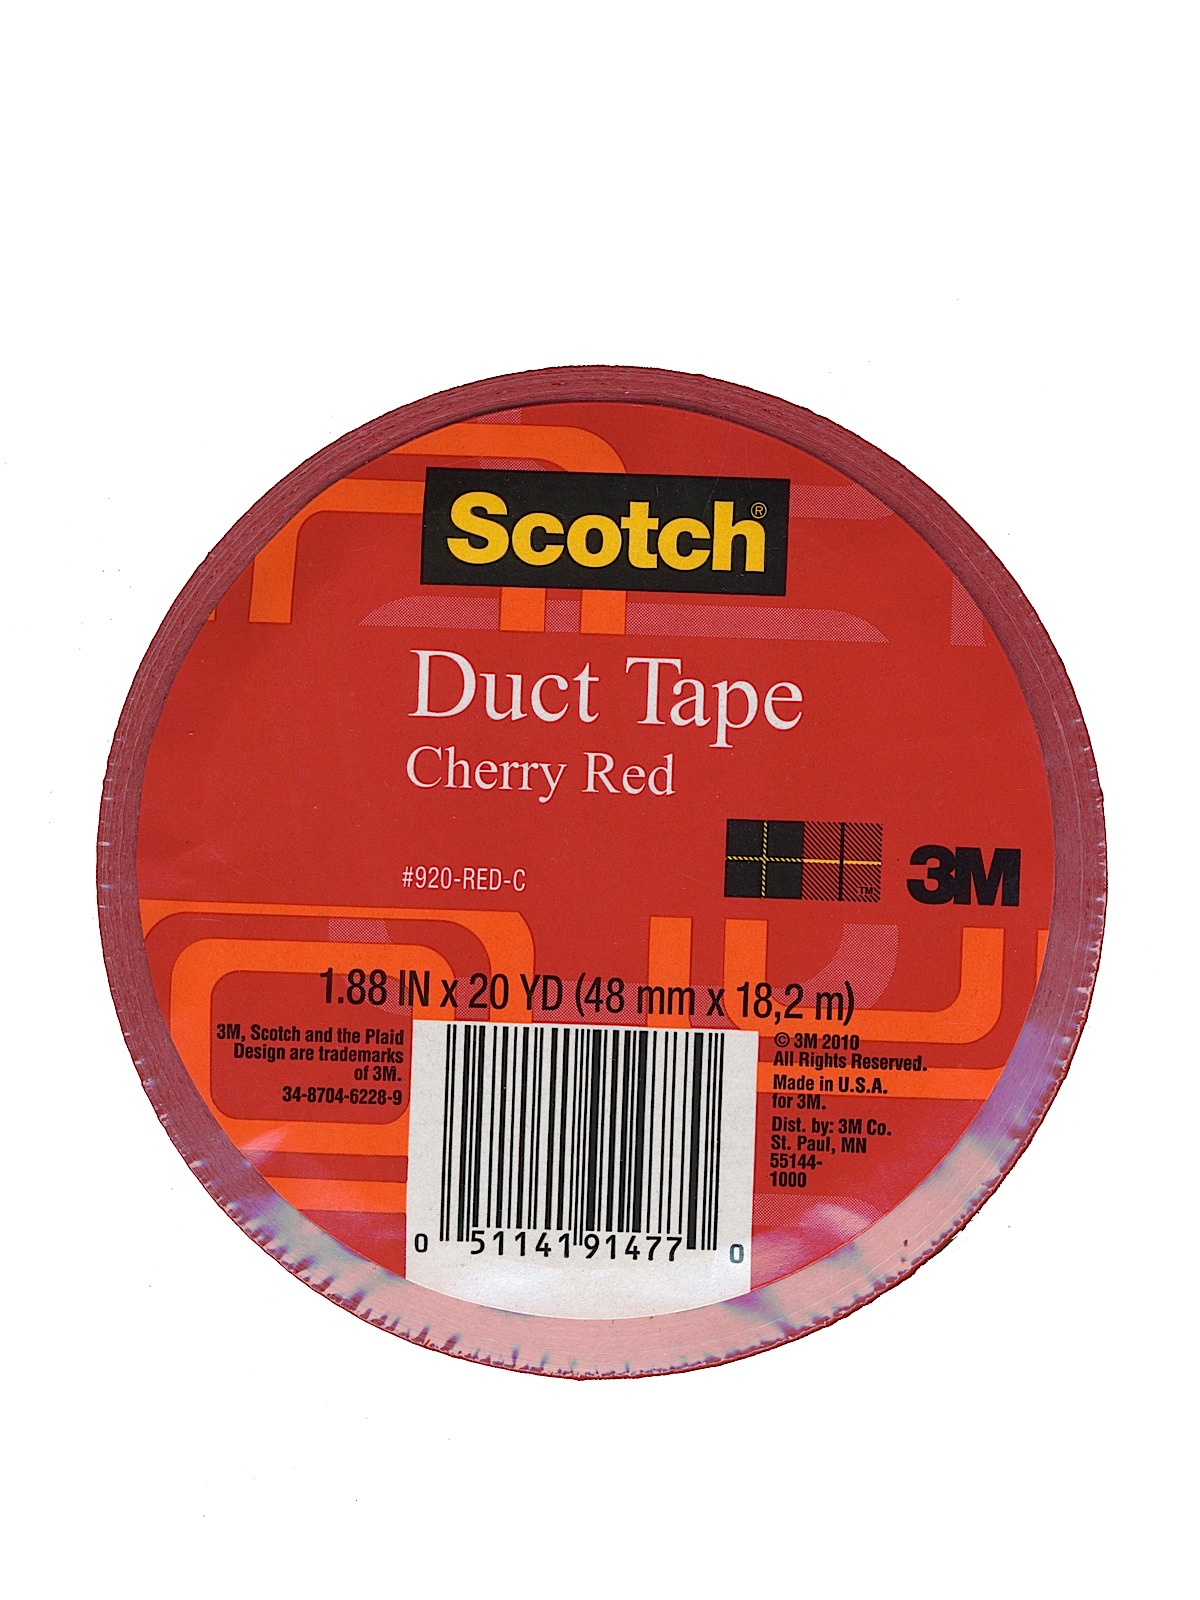 Colored Duct Tape Red 1.88 In. X 20 Yd. Roll 920-RED-C